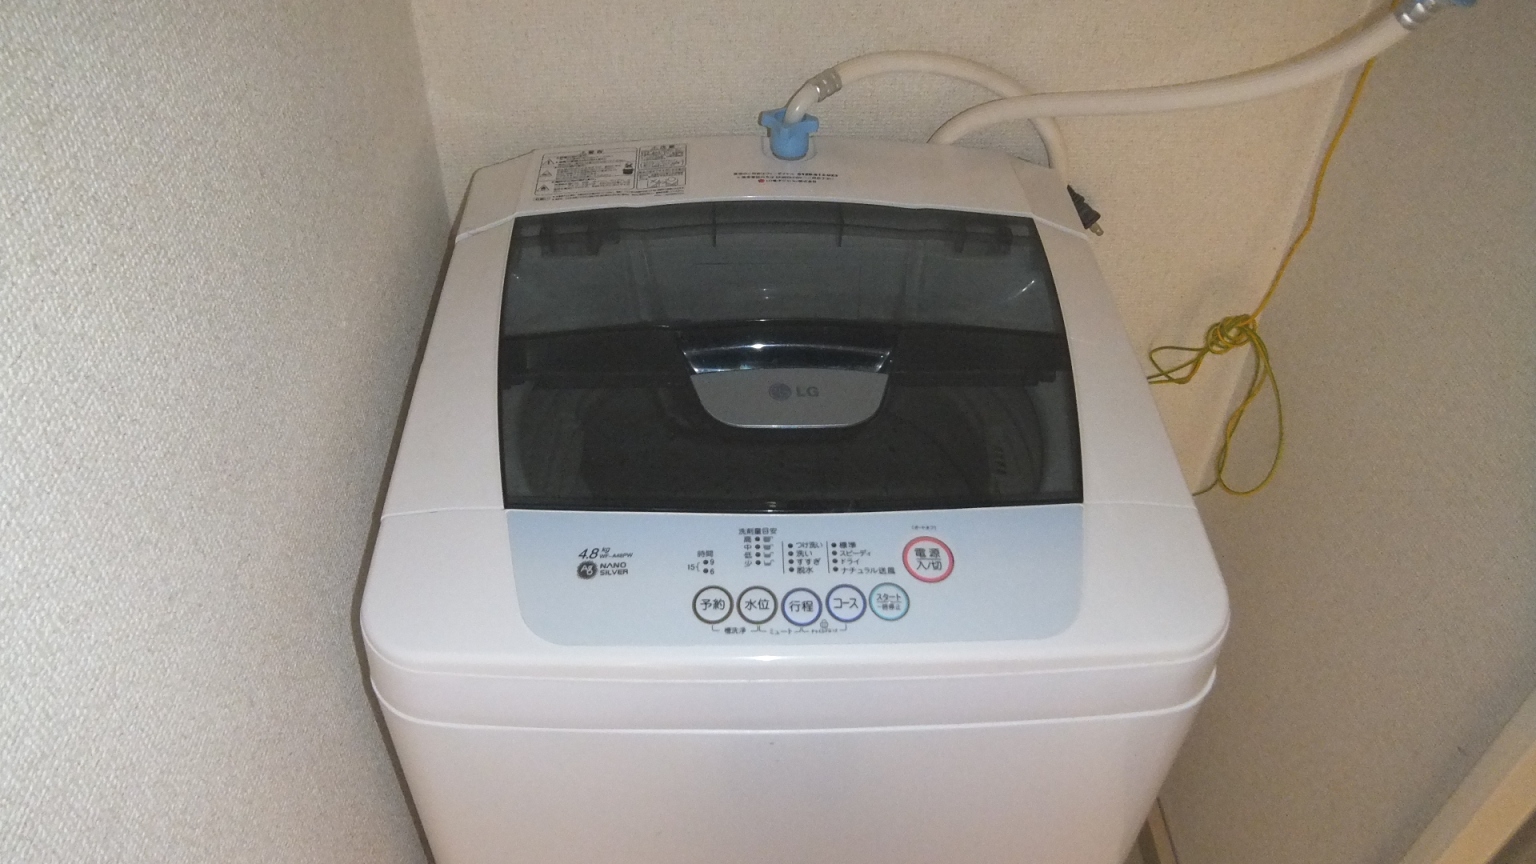 Other Equipment. Fully automatic washing machine